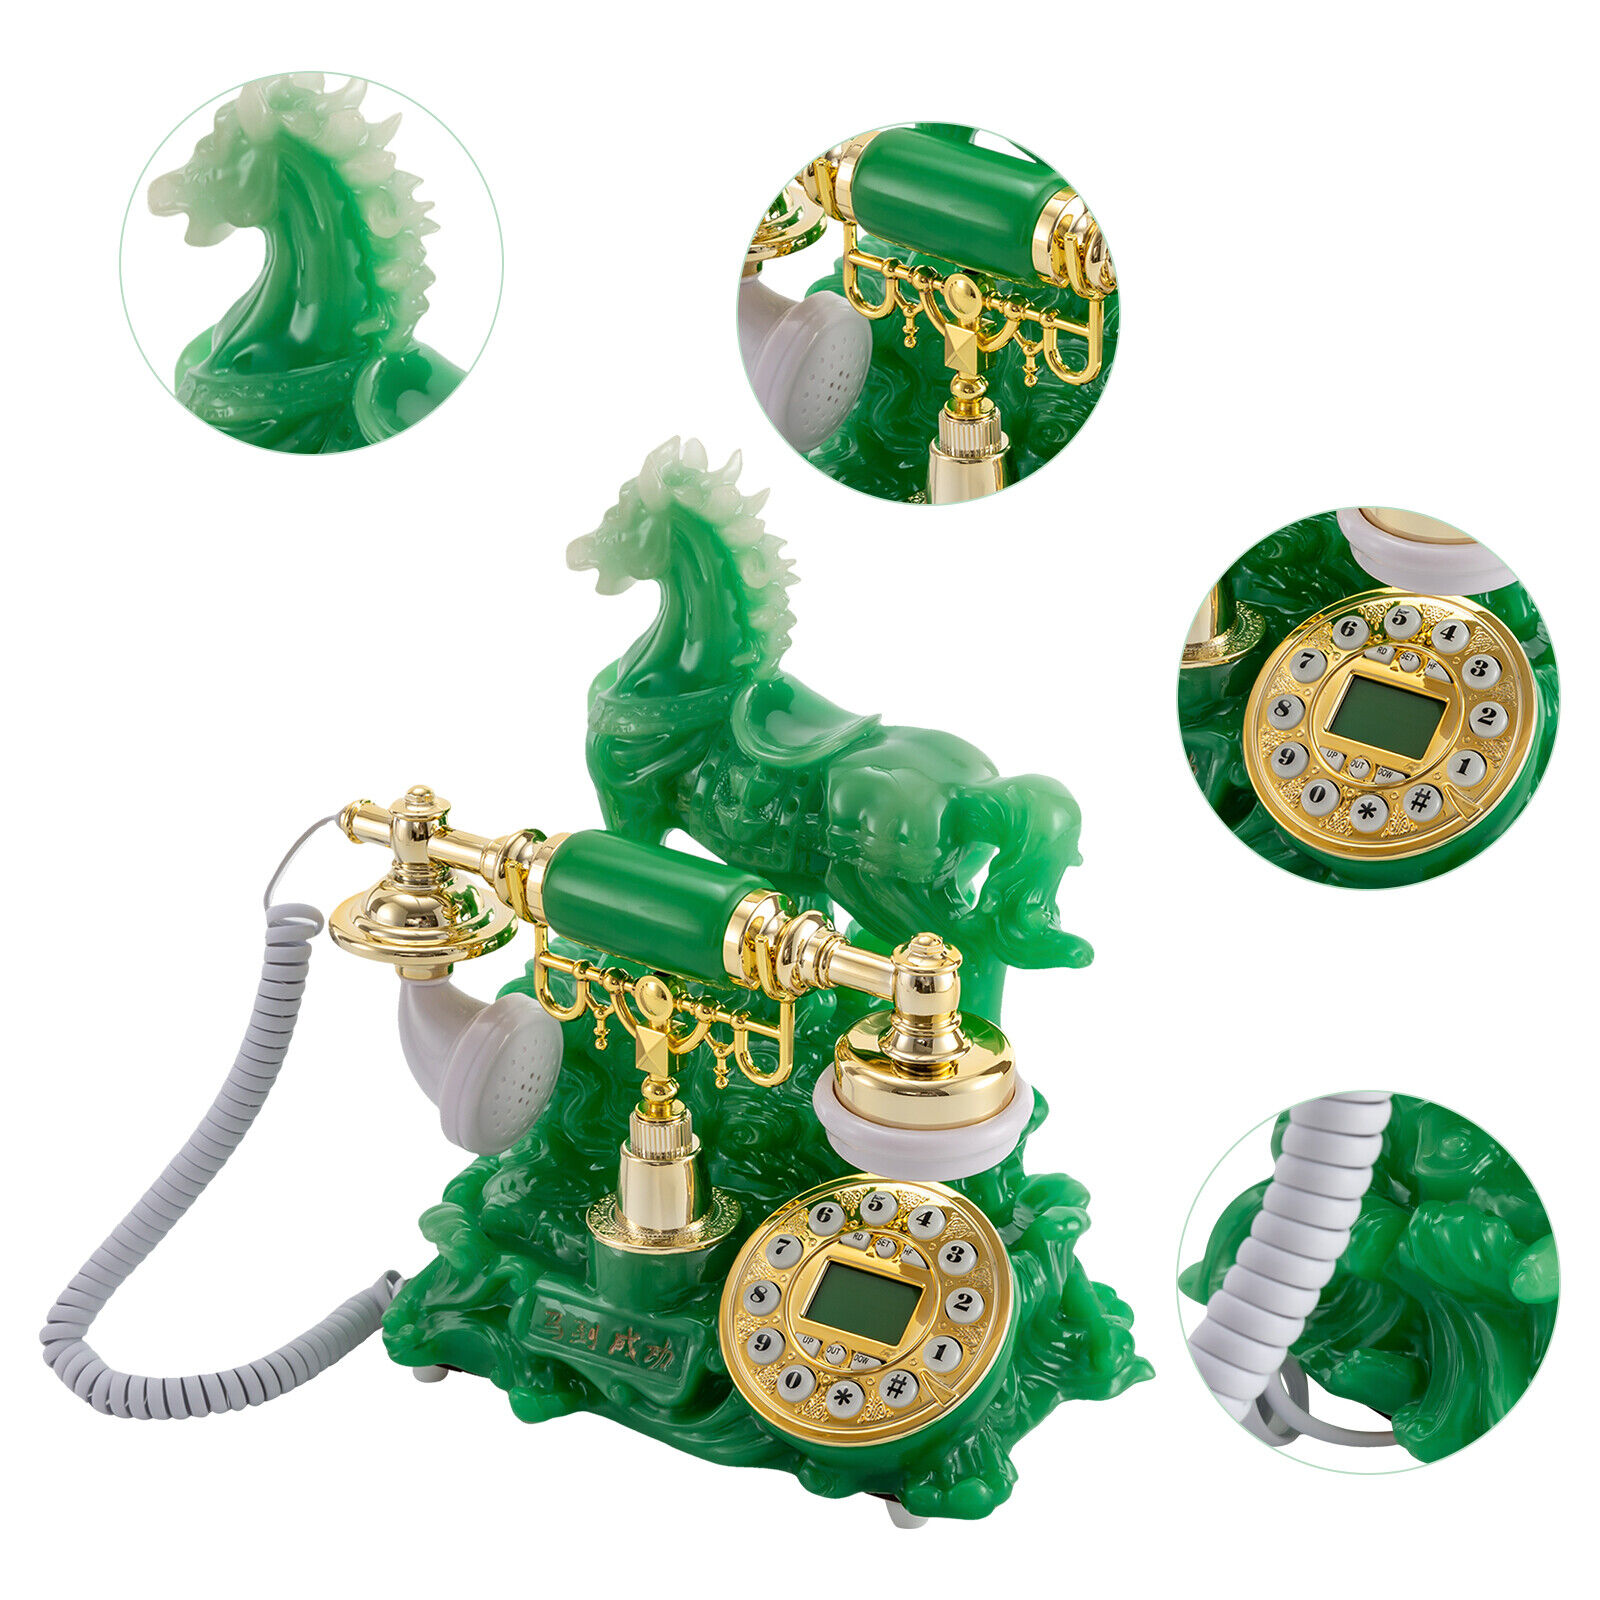 Retro Horse Design Telephone Dial Corded Phone Exquisite Workmanship Green Unbranded Does not apply